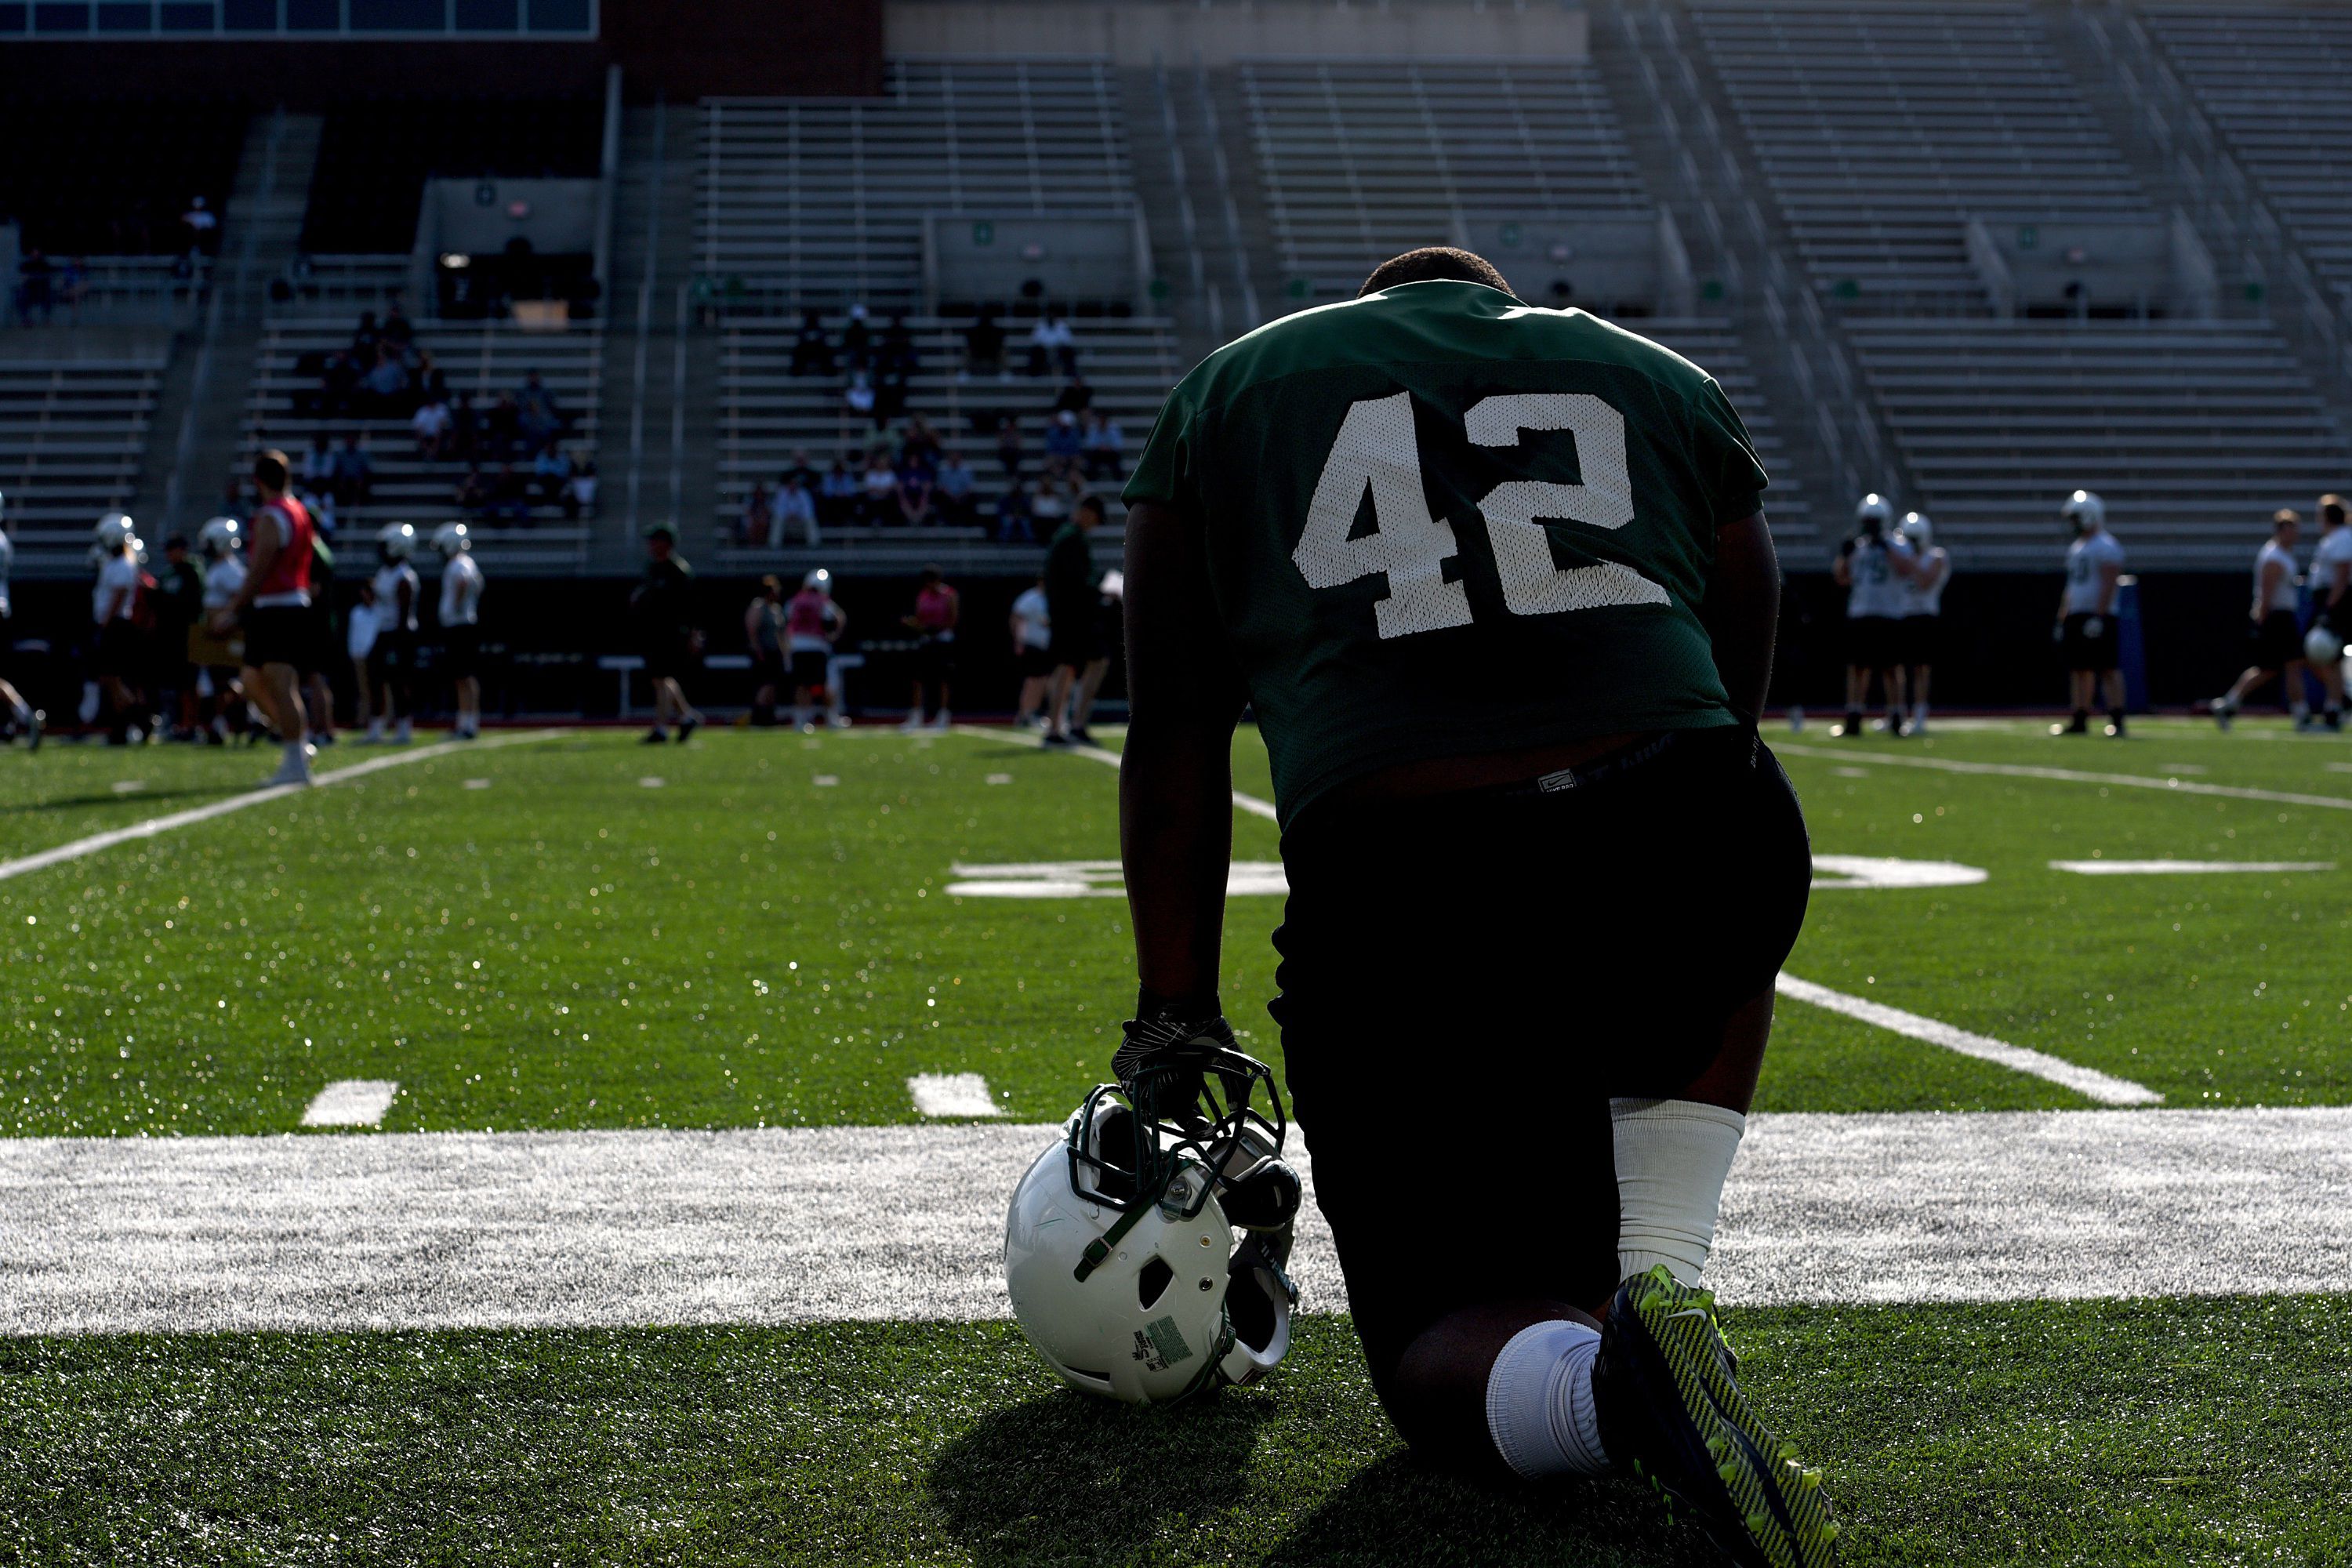 Dartmouth football player Davaron Stockman watches practice on April 28, 2017. Some players have sensors implanted in their helmets.  (Valley News - Jennifer Hauck) Copyright Valley News. May not be reprinted or used online without permission. Send requests to permission@vnews.com.